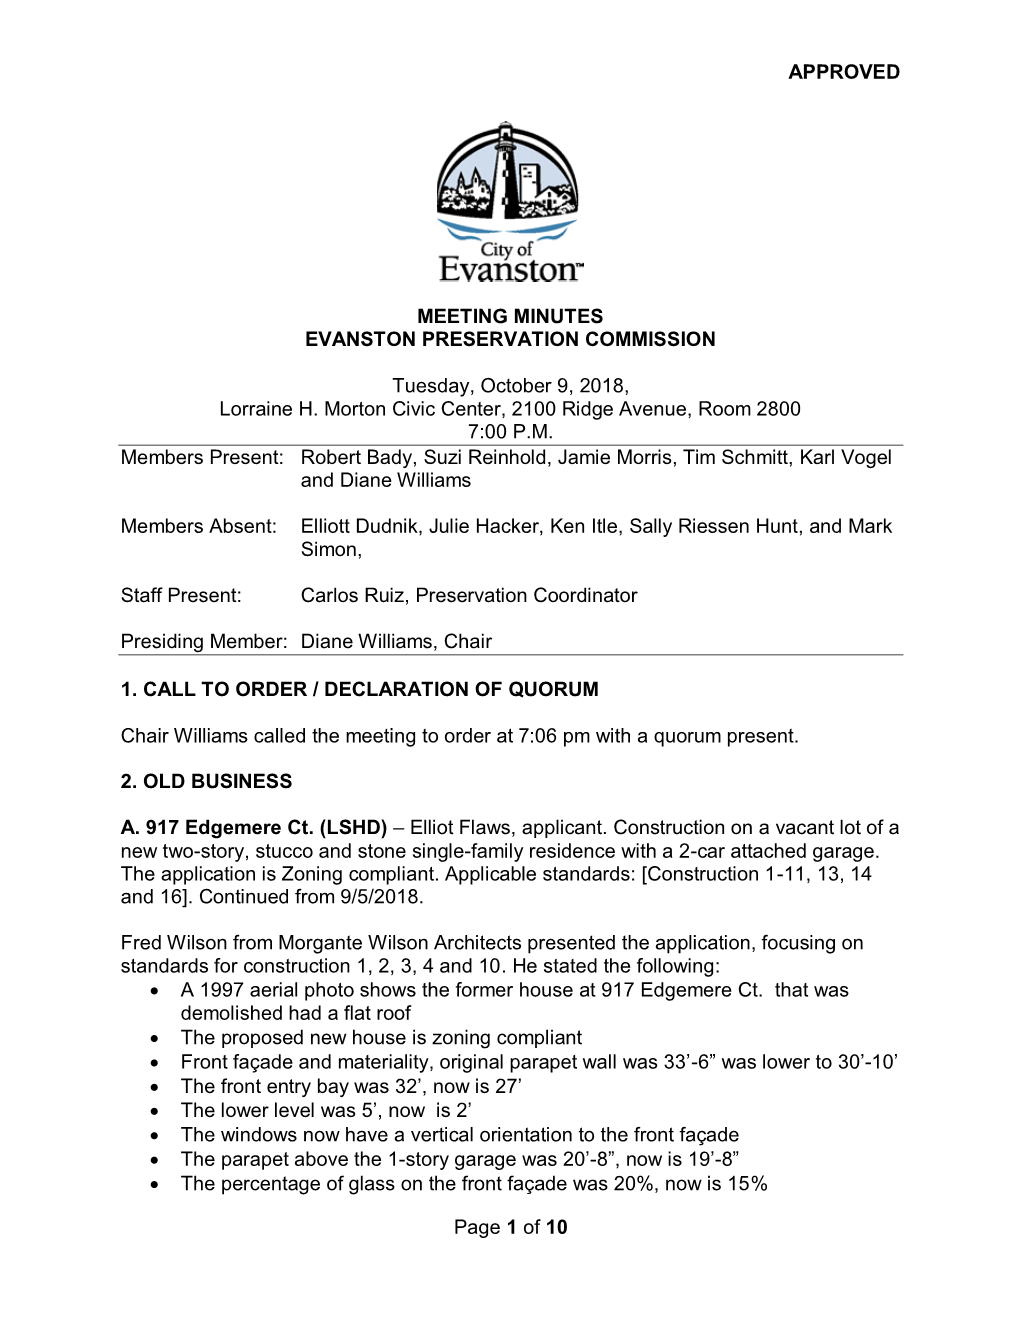 APPROVED Page 1 of 10 MEETING MINUTES EVANSTON